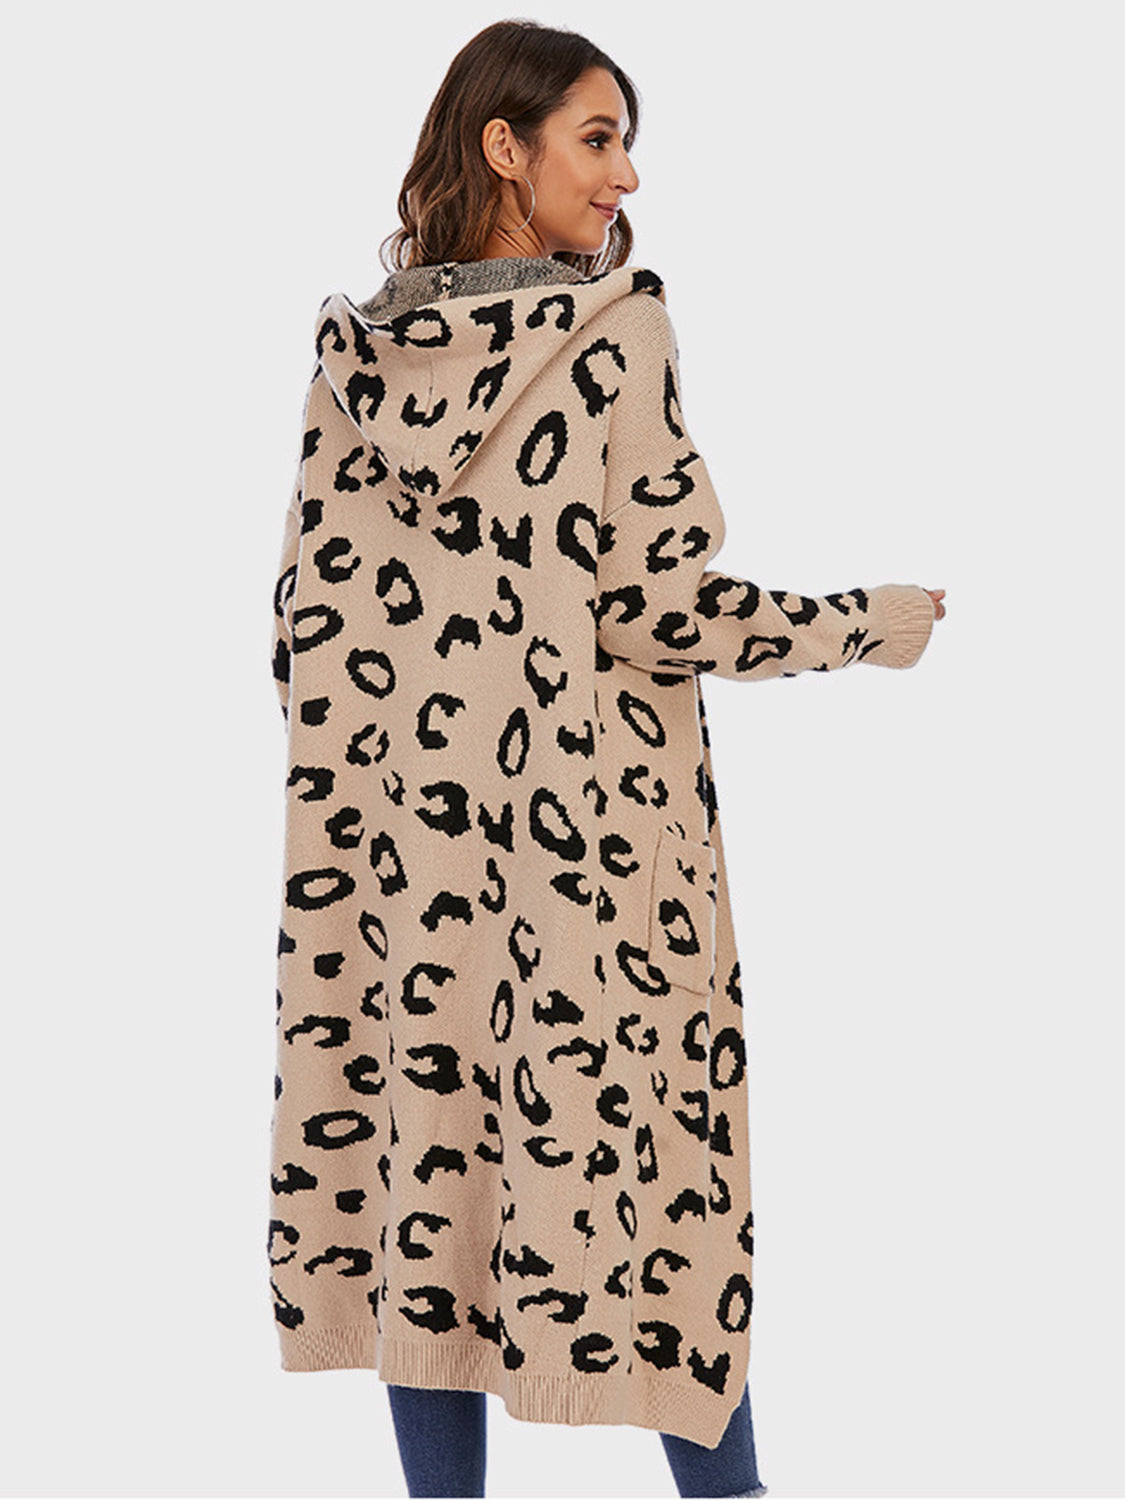 Leopard Hooded Cardigan with Pockets - Women’s Clothing & Accessories - Shirts & Tops - 2 - 2024